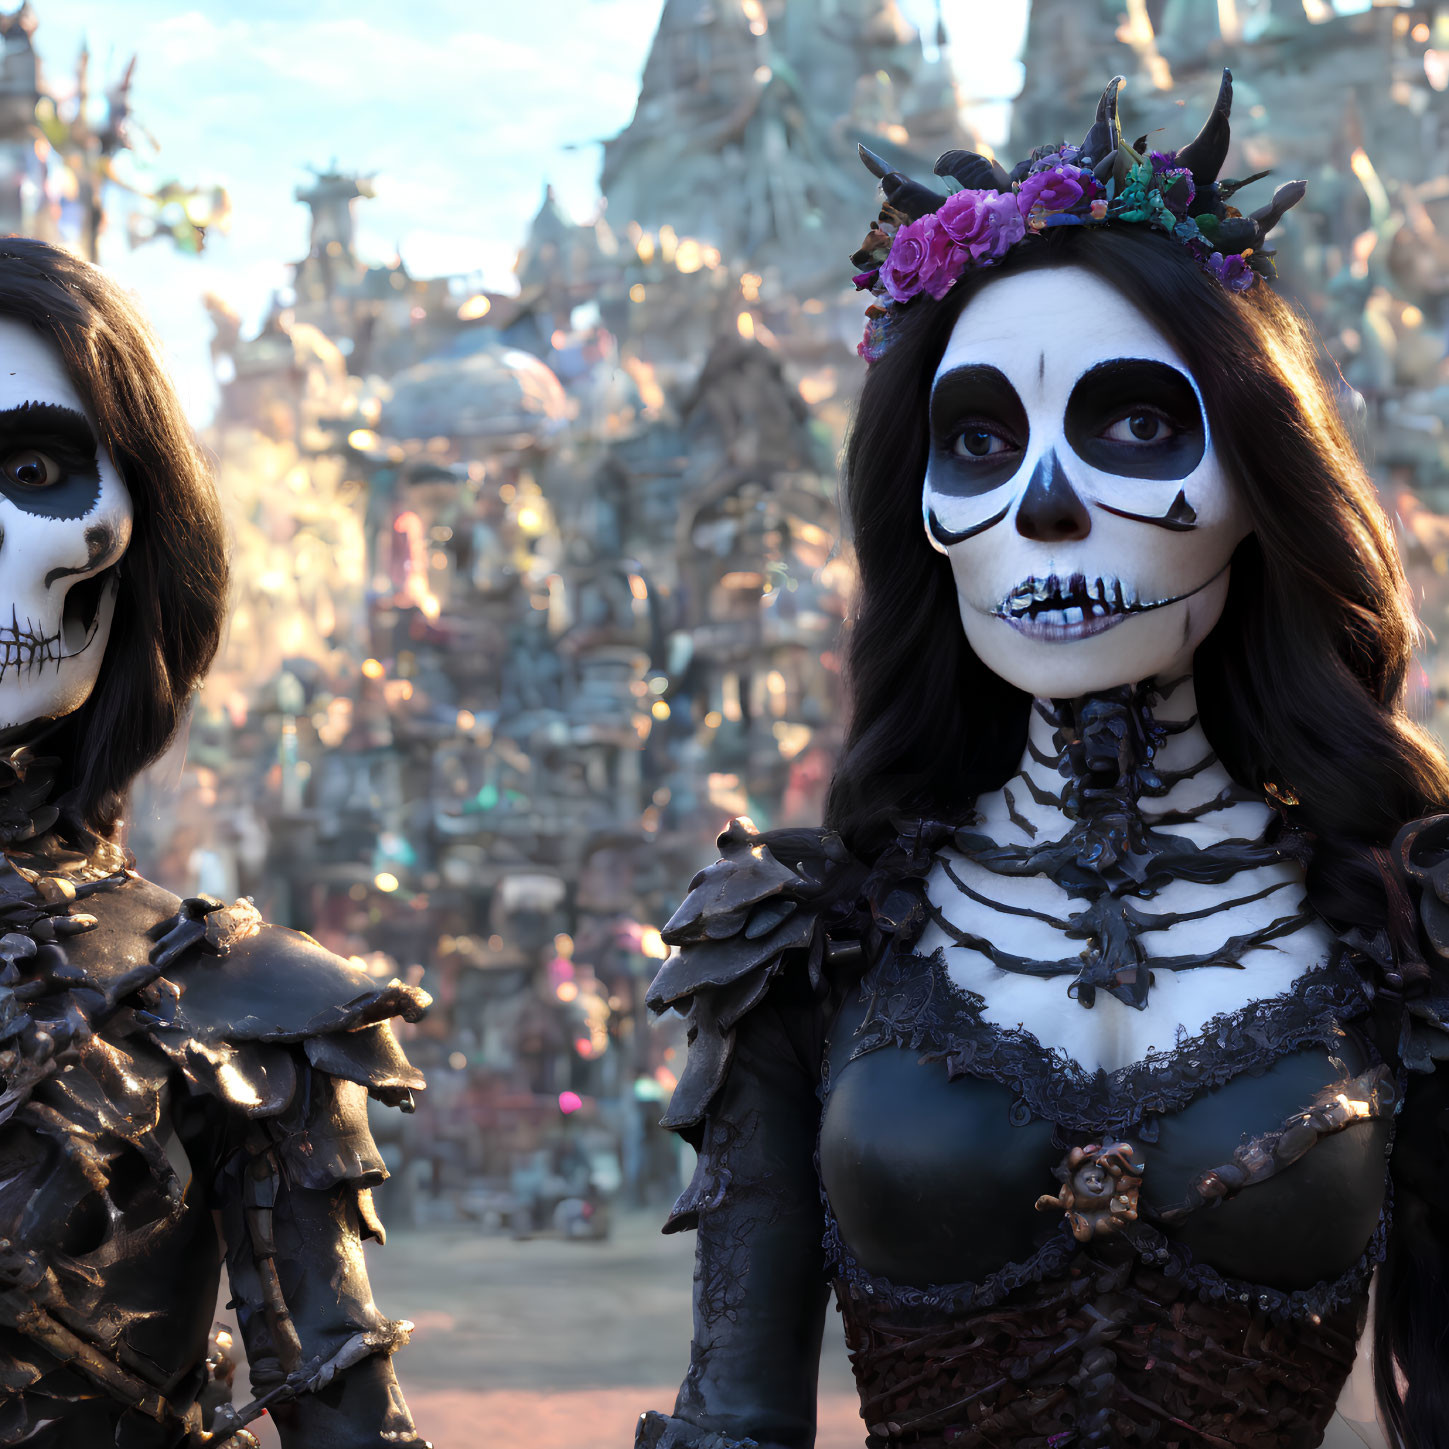 Skull Makeup People in Elaborate Costumes at Day of the Dead Celebration